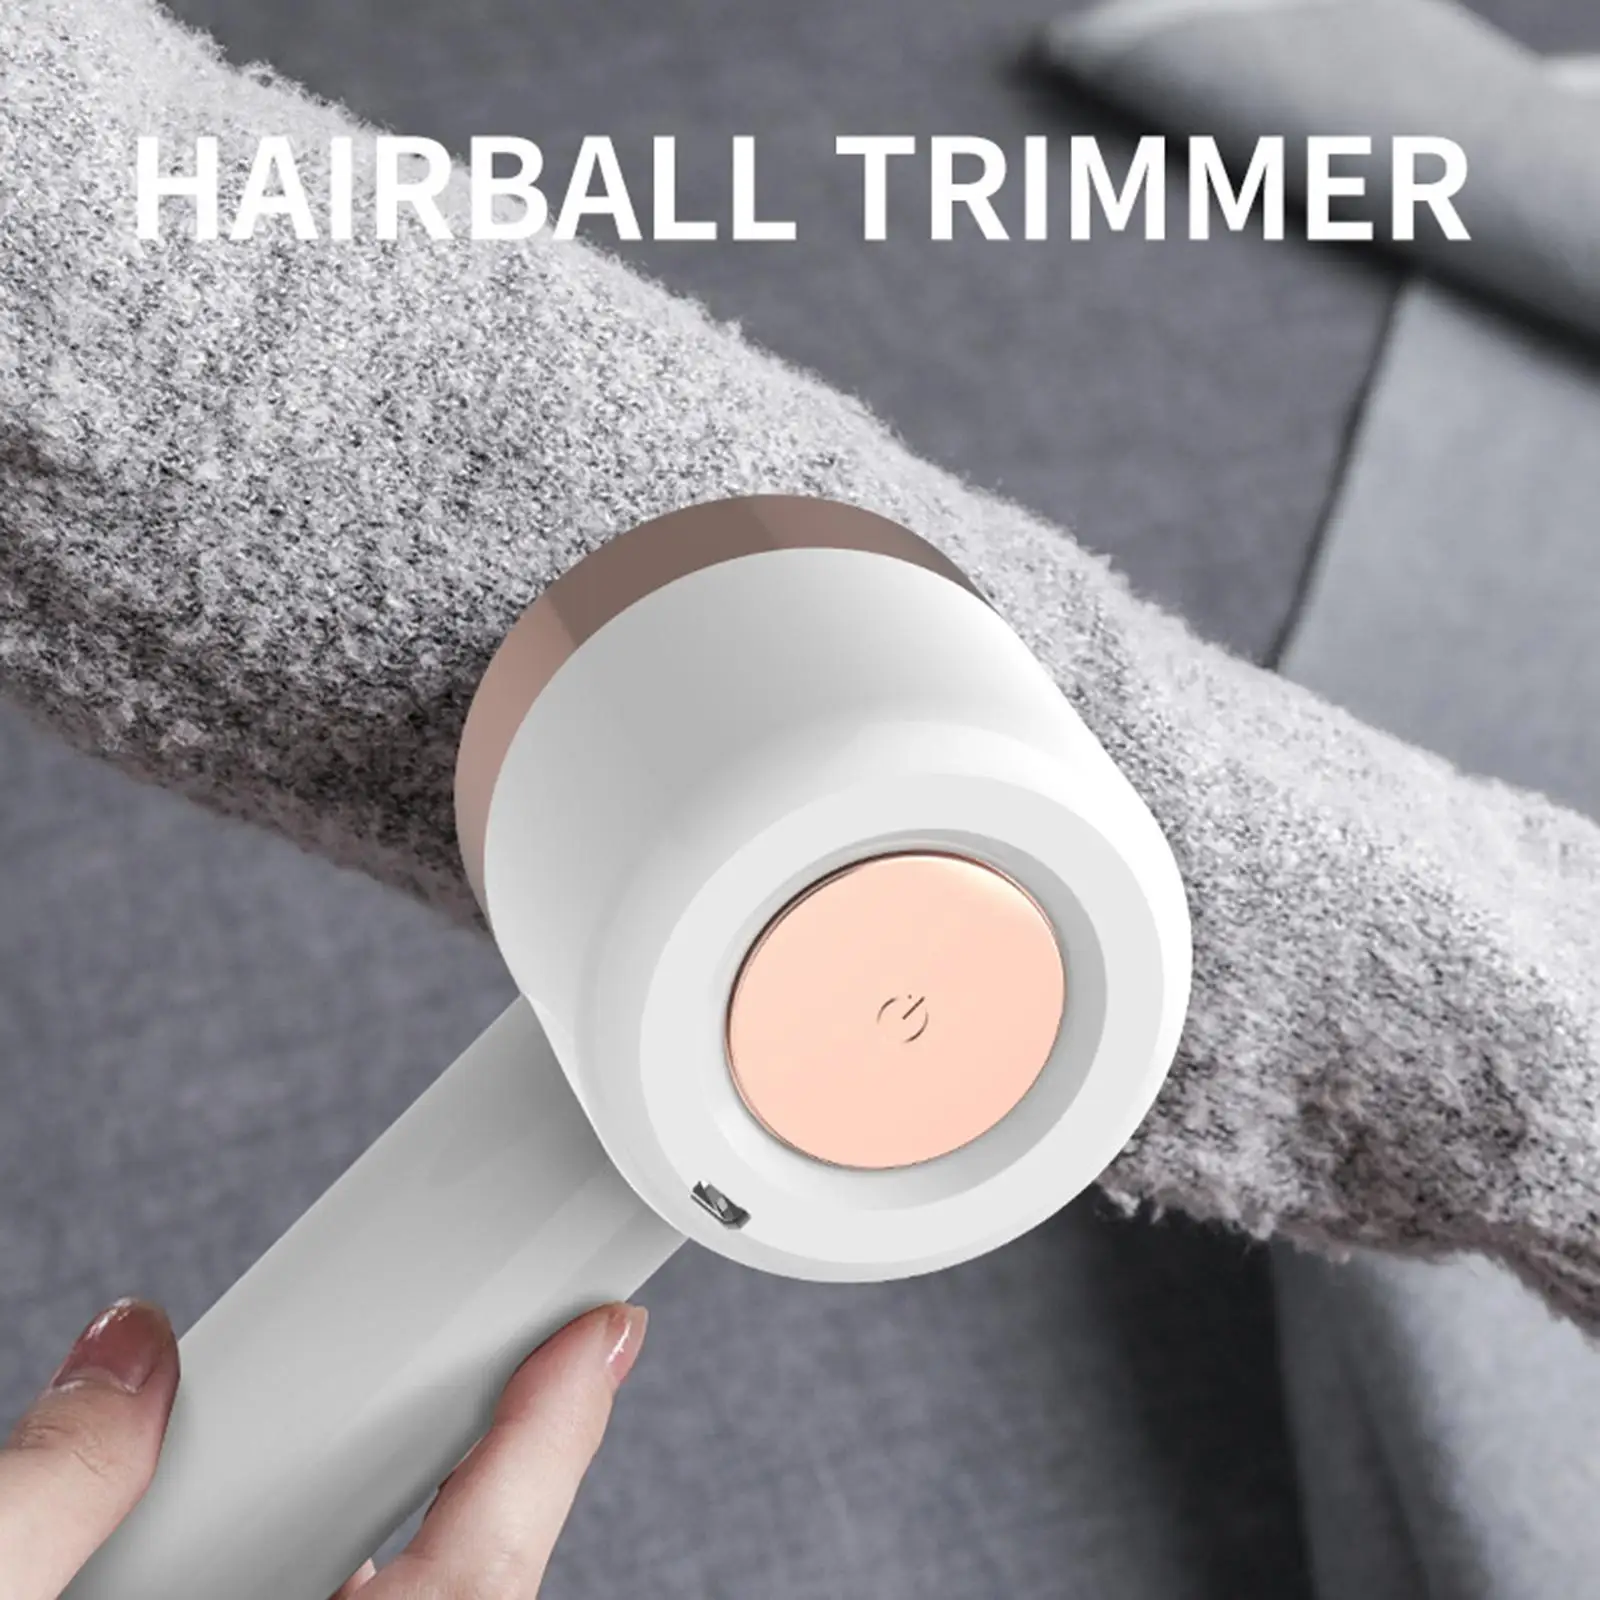 Rechargeable Hairball Trimmer Fabric Lint Removers Home Handheld Sweater Fabric Shaver Portable Lint Remover Defuzzer